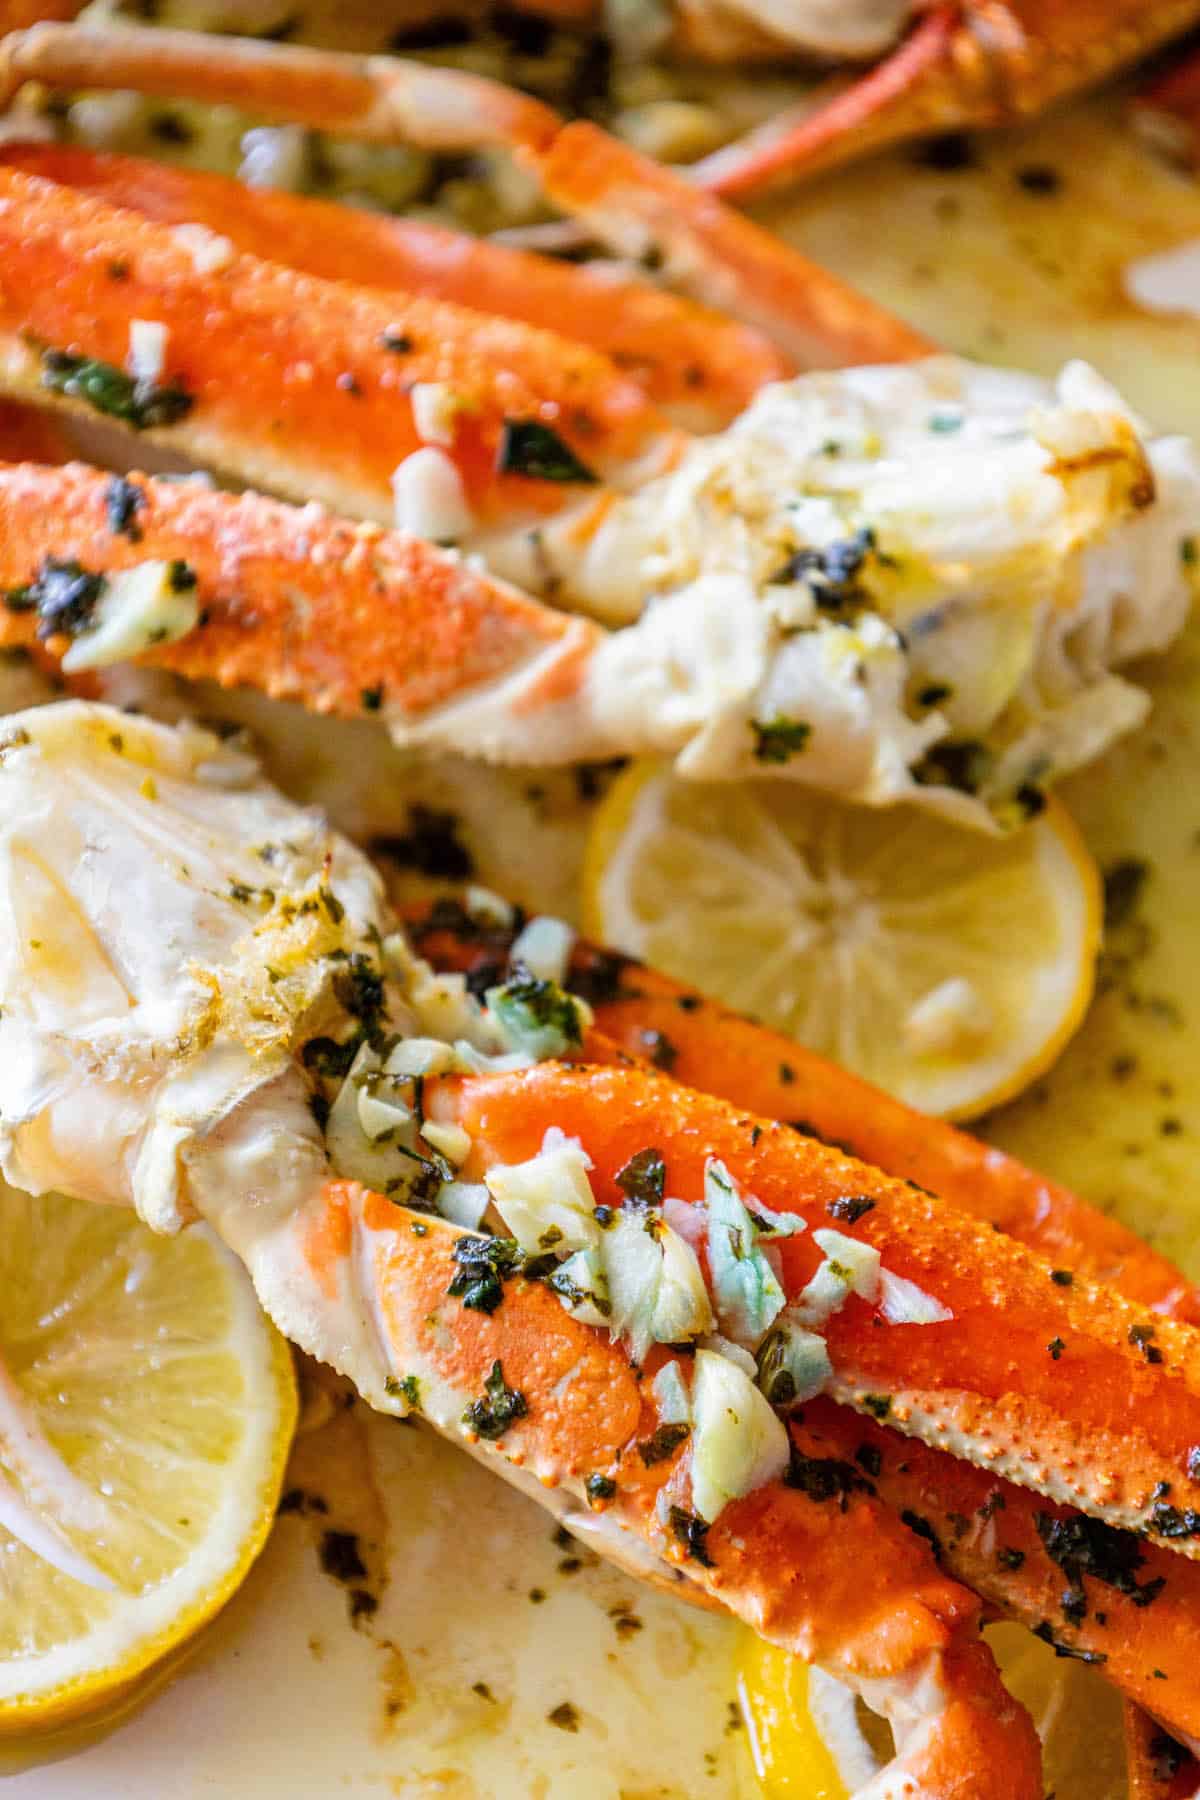 Baked snow crab legs on a plate with lemon wedges.